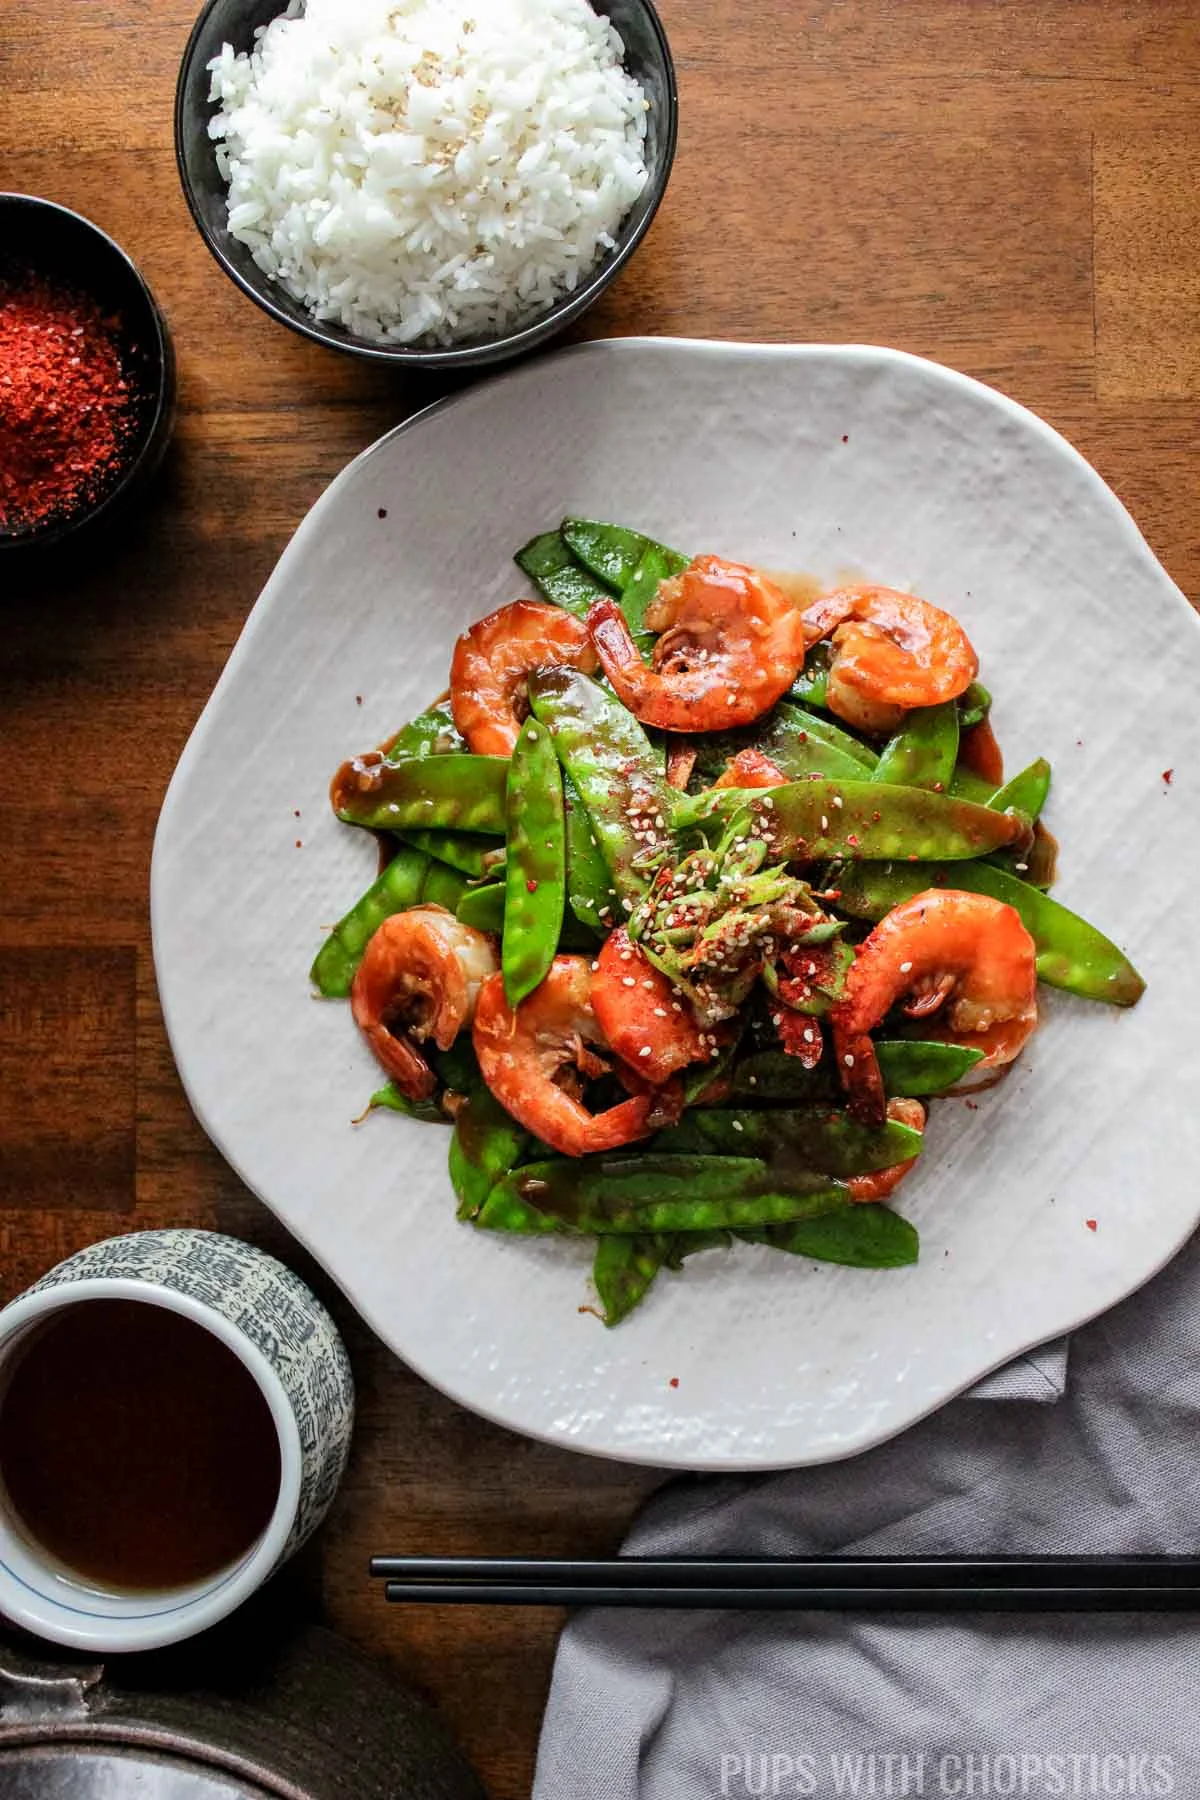 Spicy Garlic Shrimp with Snow Peas on a plate with a side of rice and a cup of tea on a table